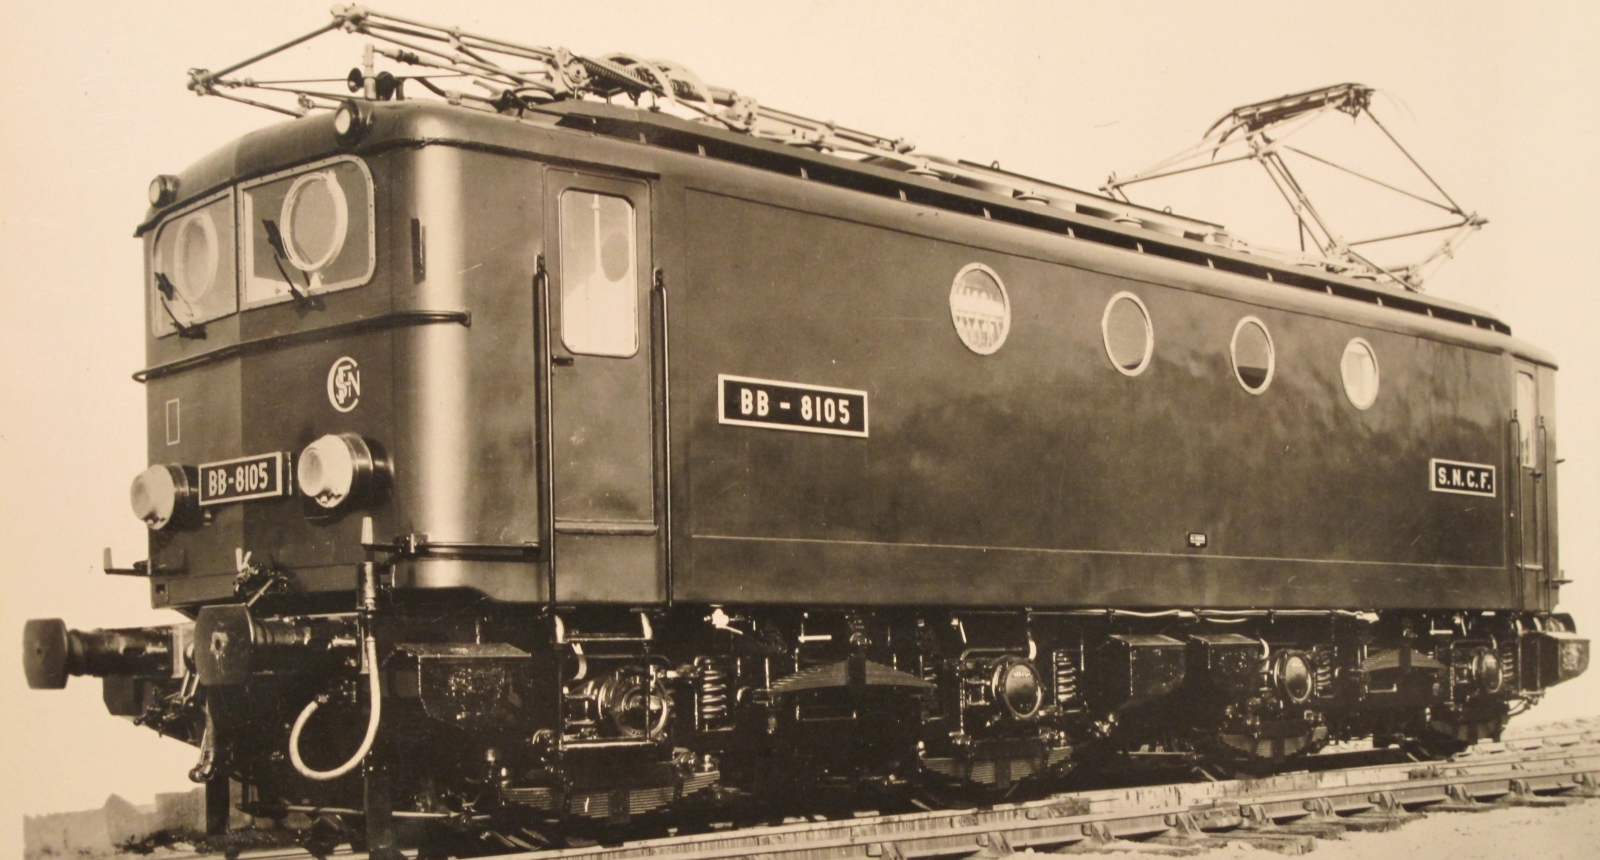 BB 8105 on a postcard from when it was made